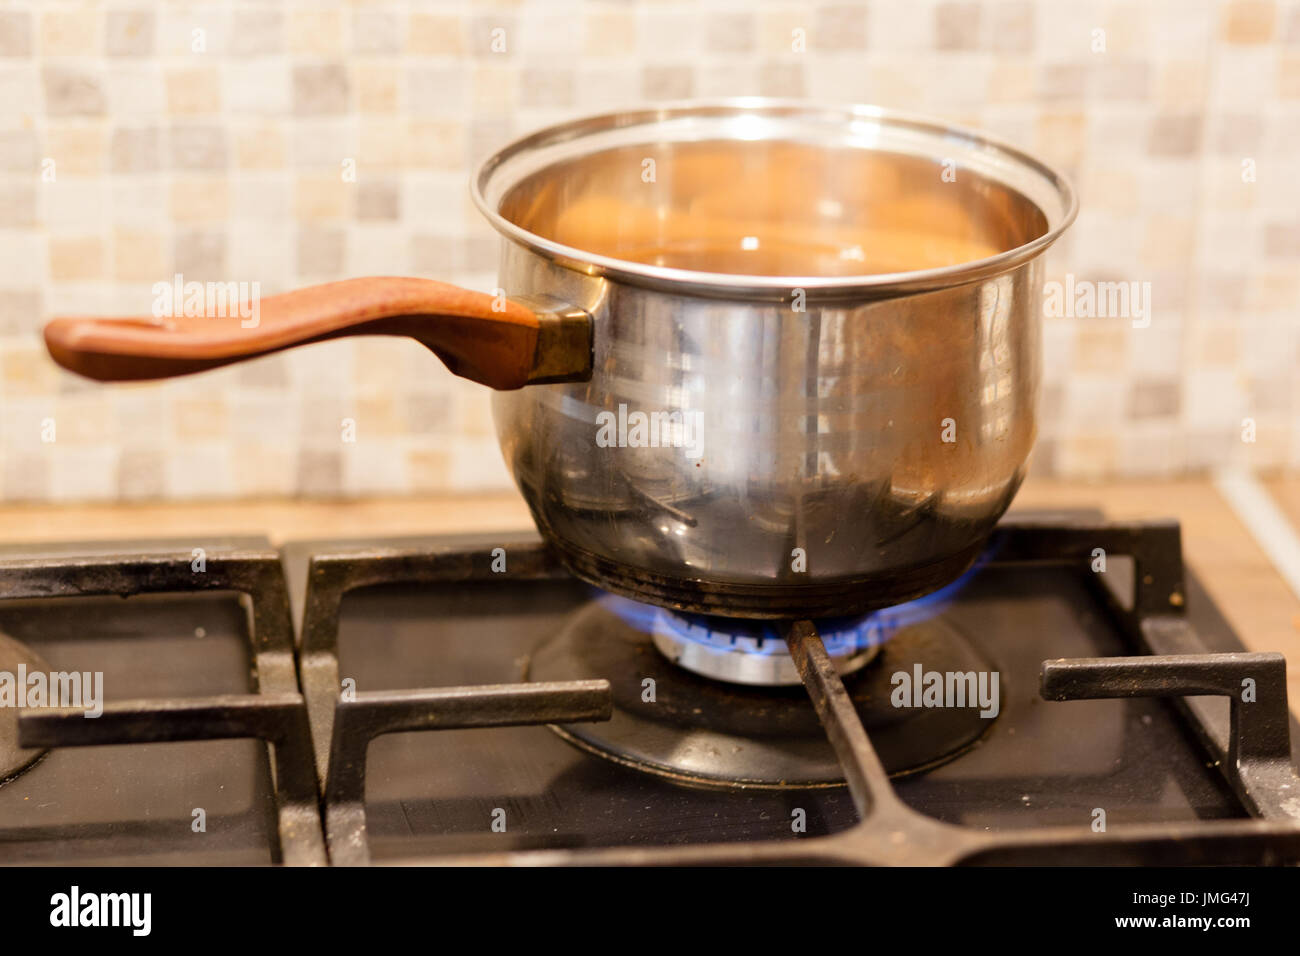 Eggs In Boiling Water On Kitchen Electric Stovetop Oven Burner Stock Photo  - Download Image Now - iStock